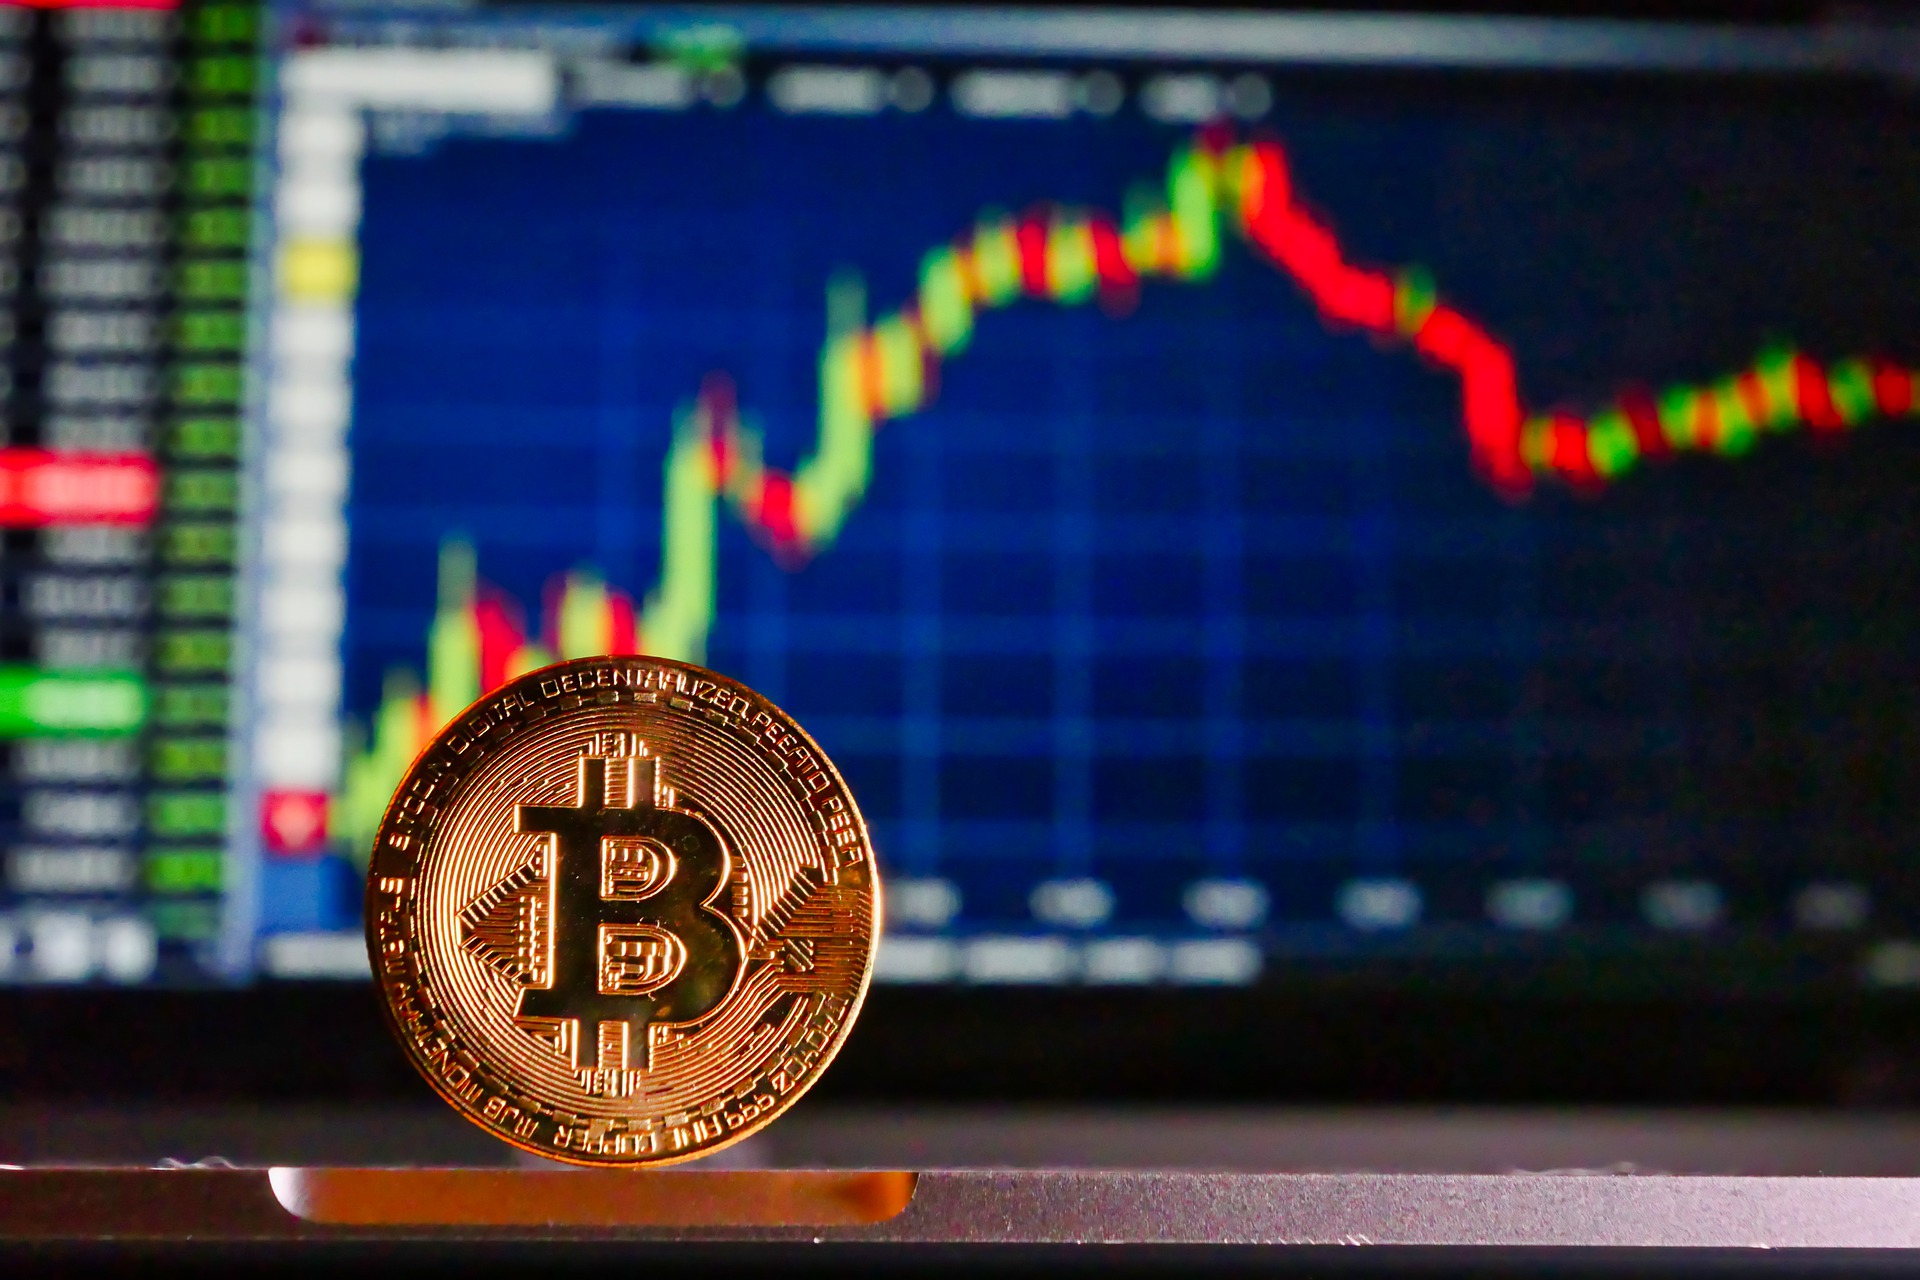 Bitcoin May Rise To $35K But Analysts Don't Expect A V-Shaped Recovery
